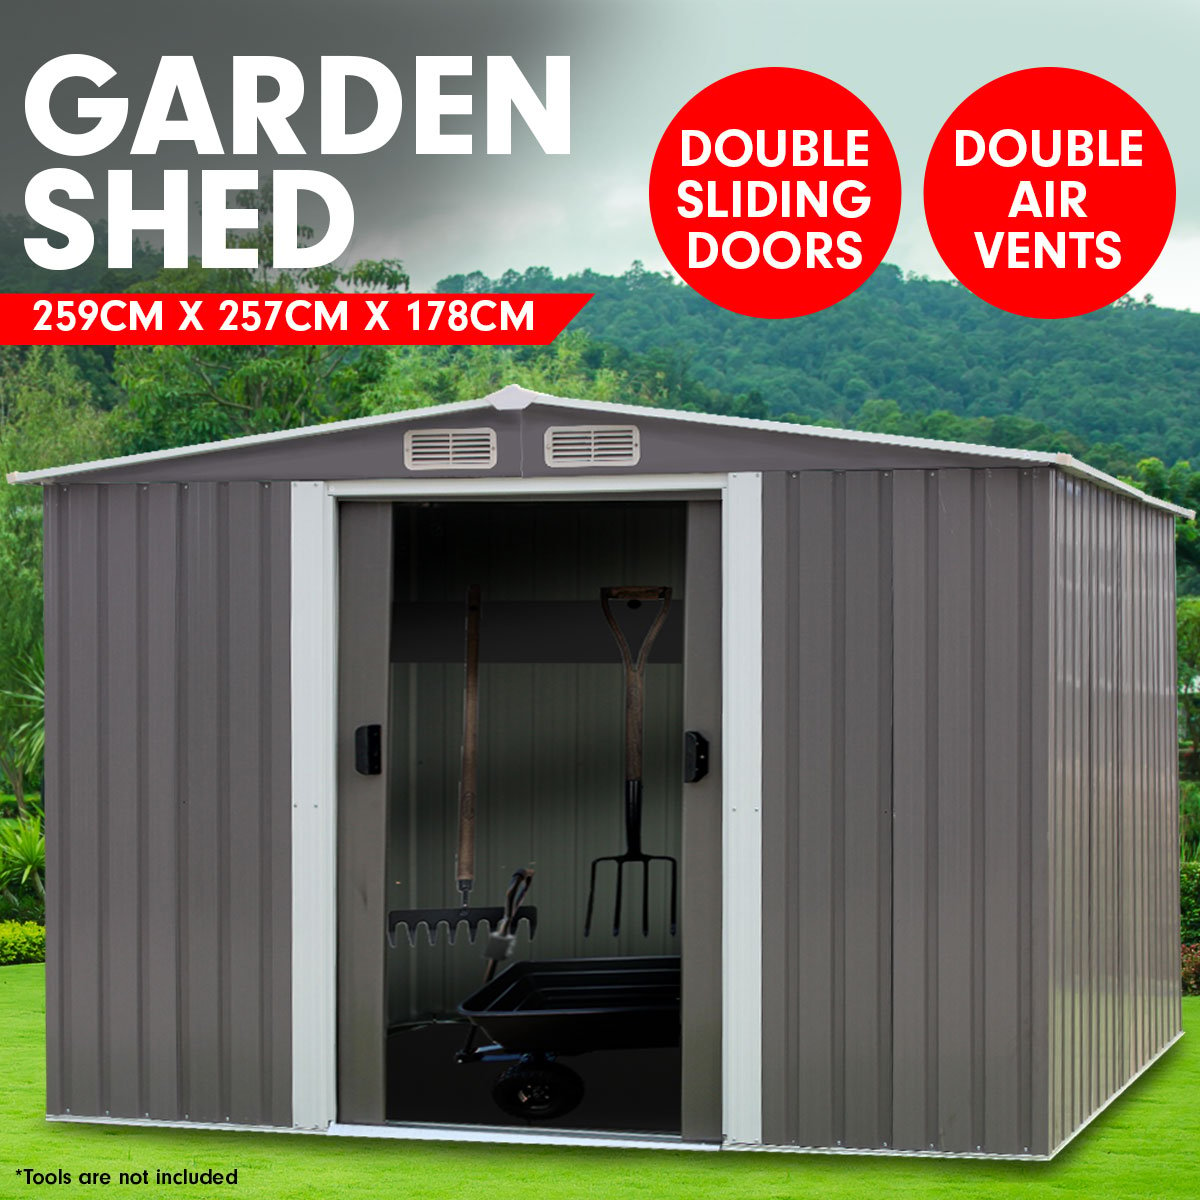 Garden Shed Spire Roof 8ft x 8ft Outdoor Storage Shelter - Grey 2